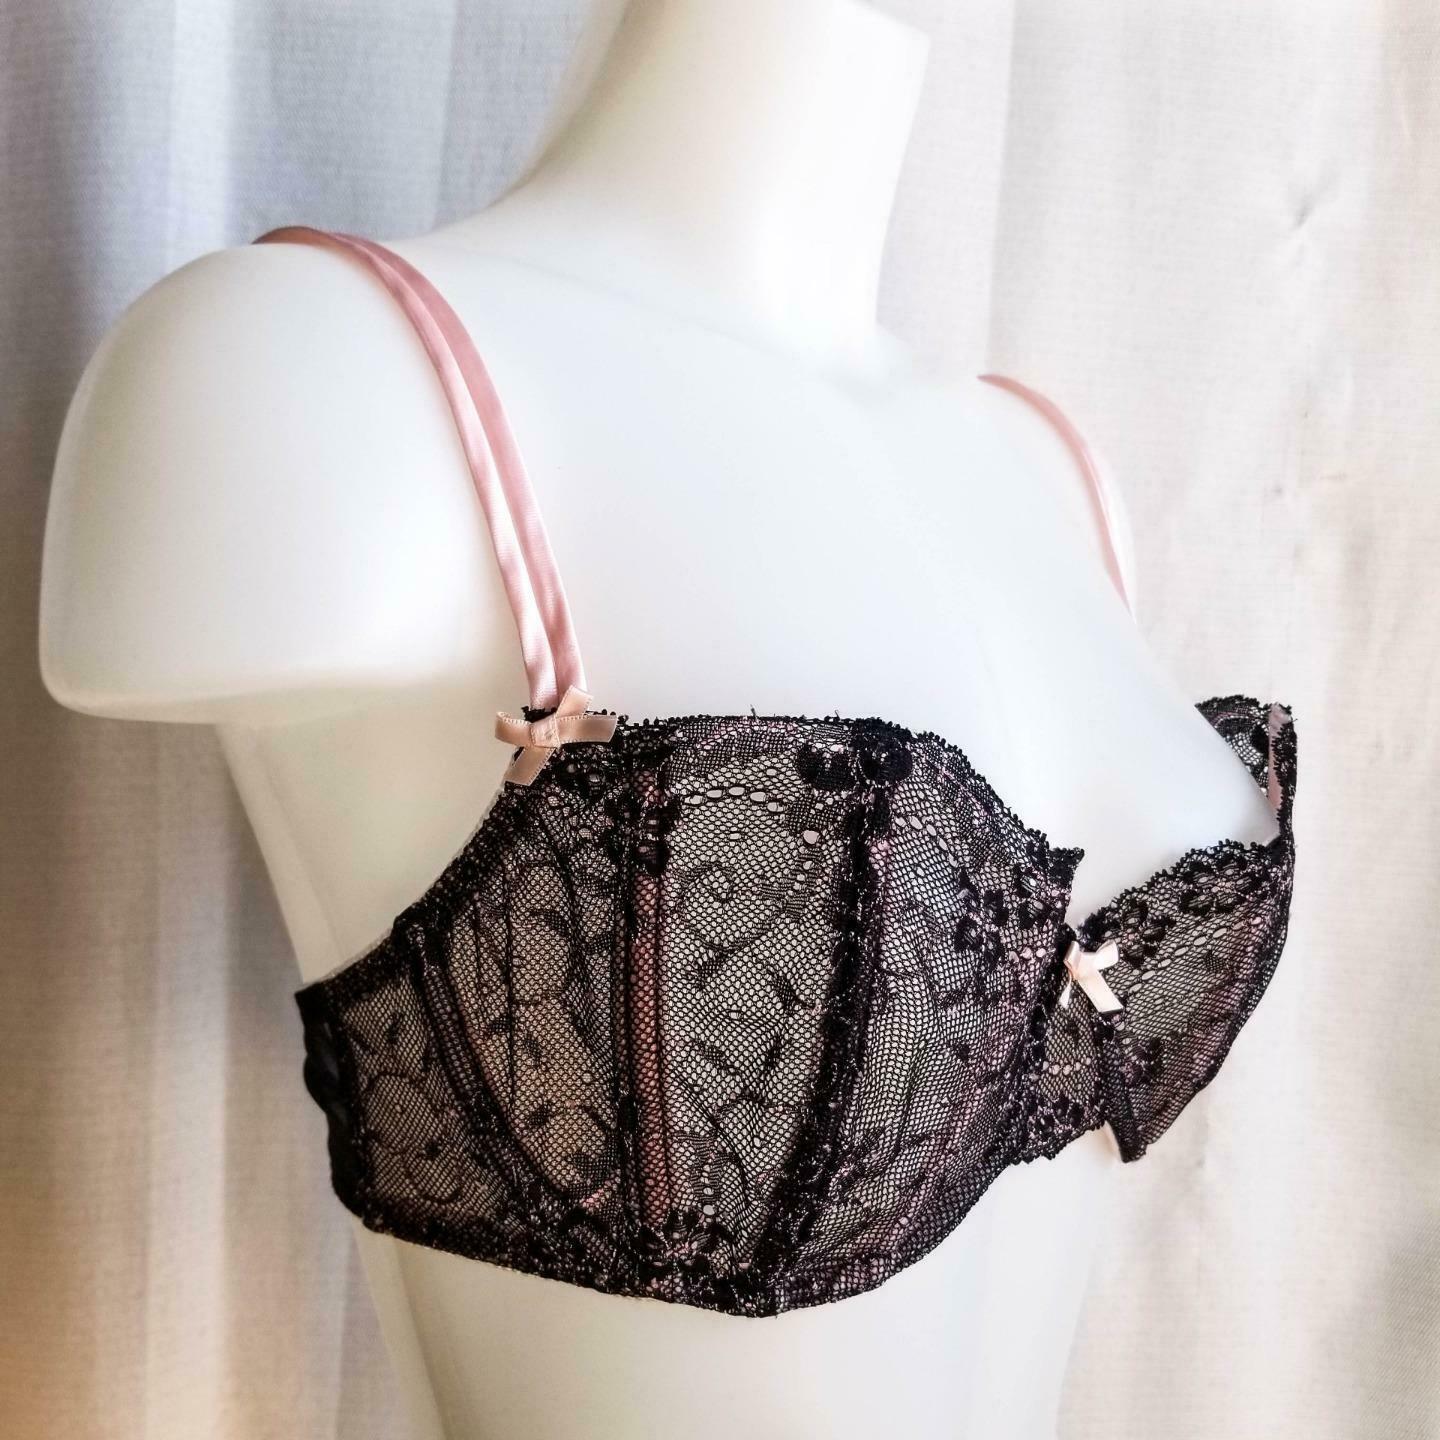 Victoria's Secret 36D Vintage Sexy Unlined and 50 similar items